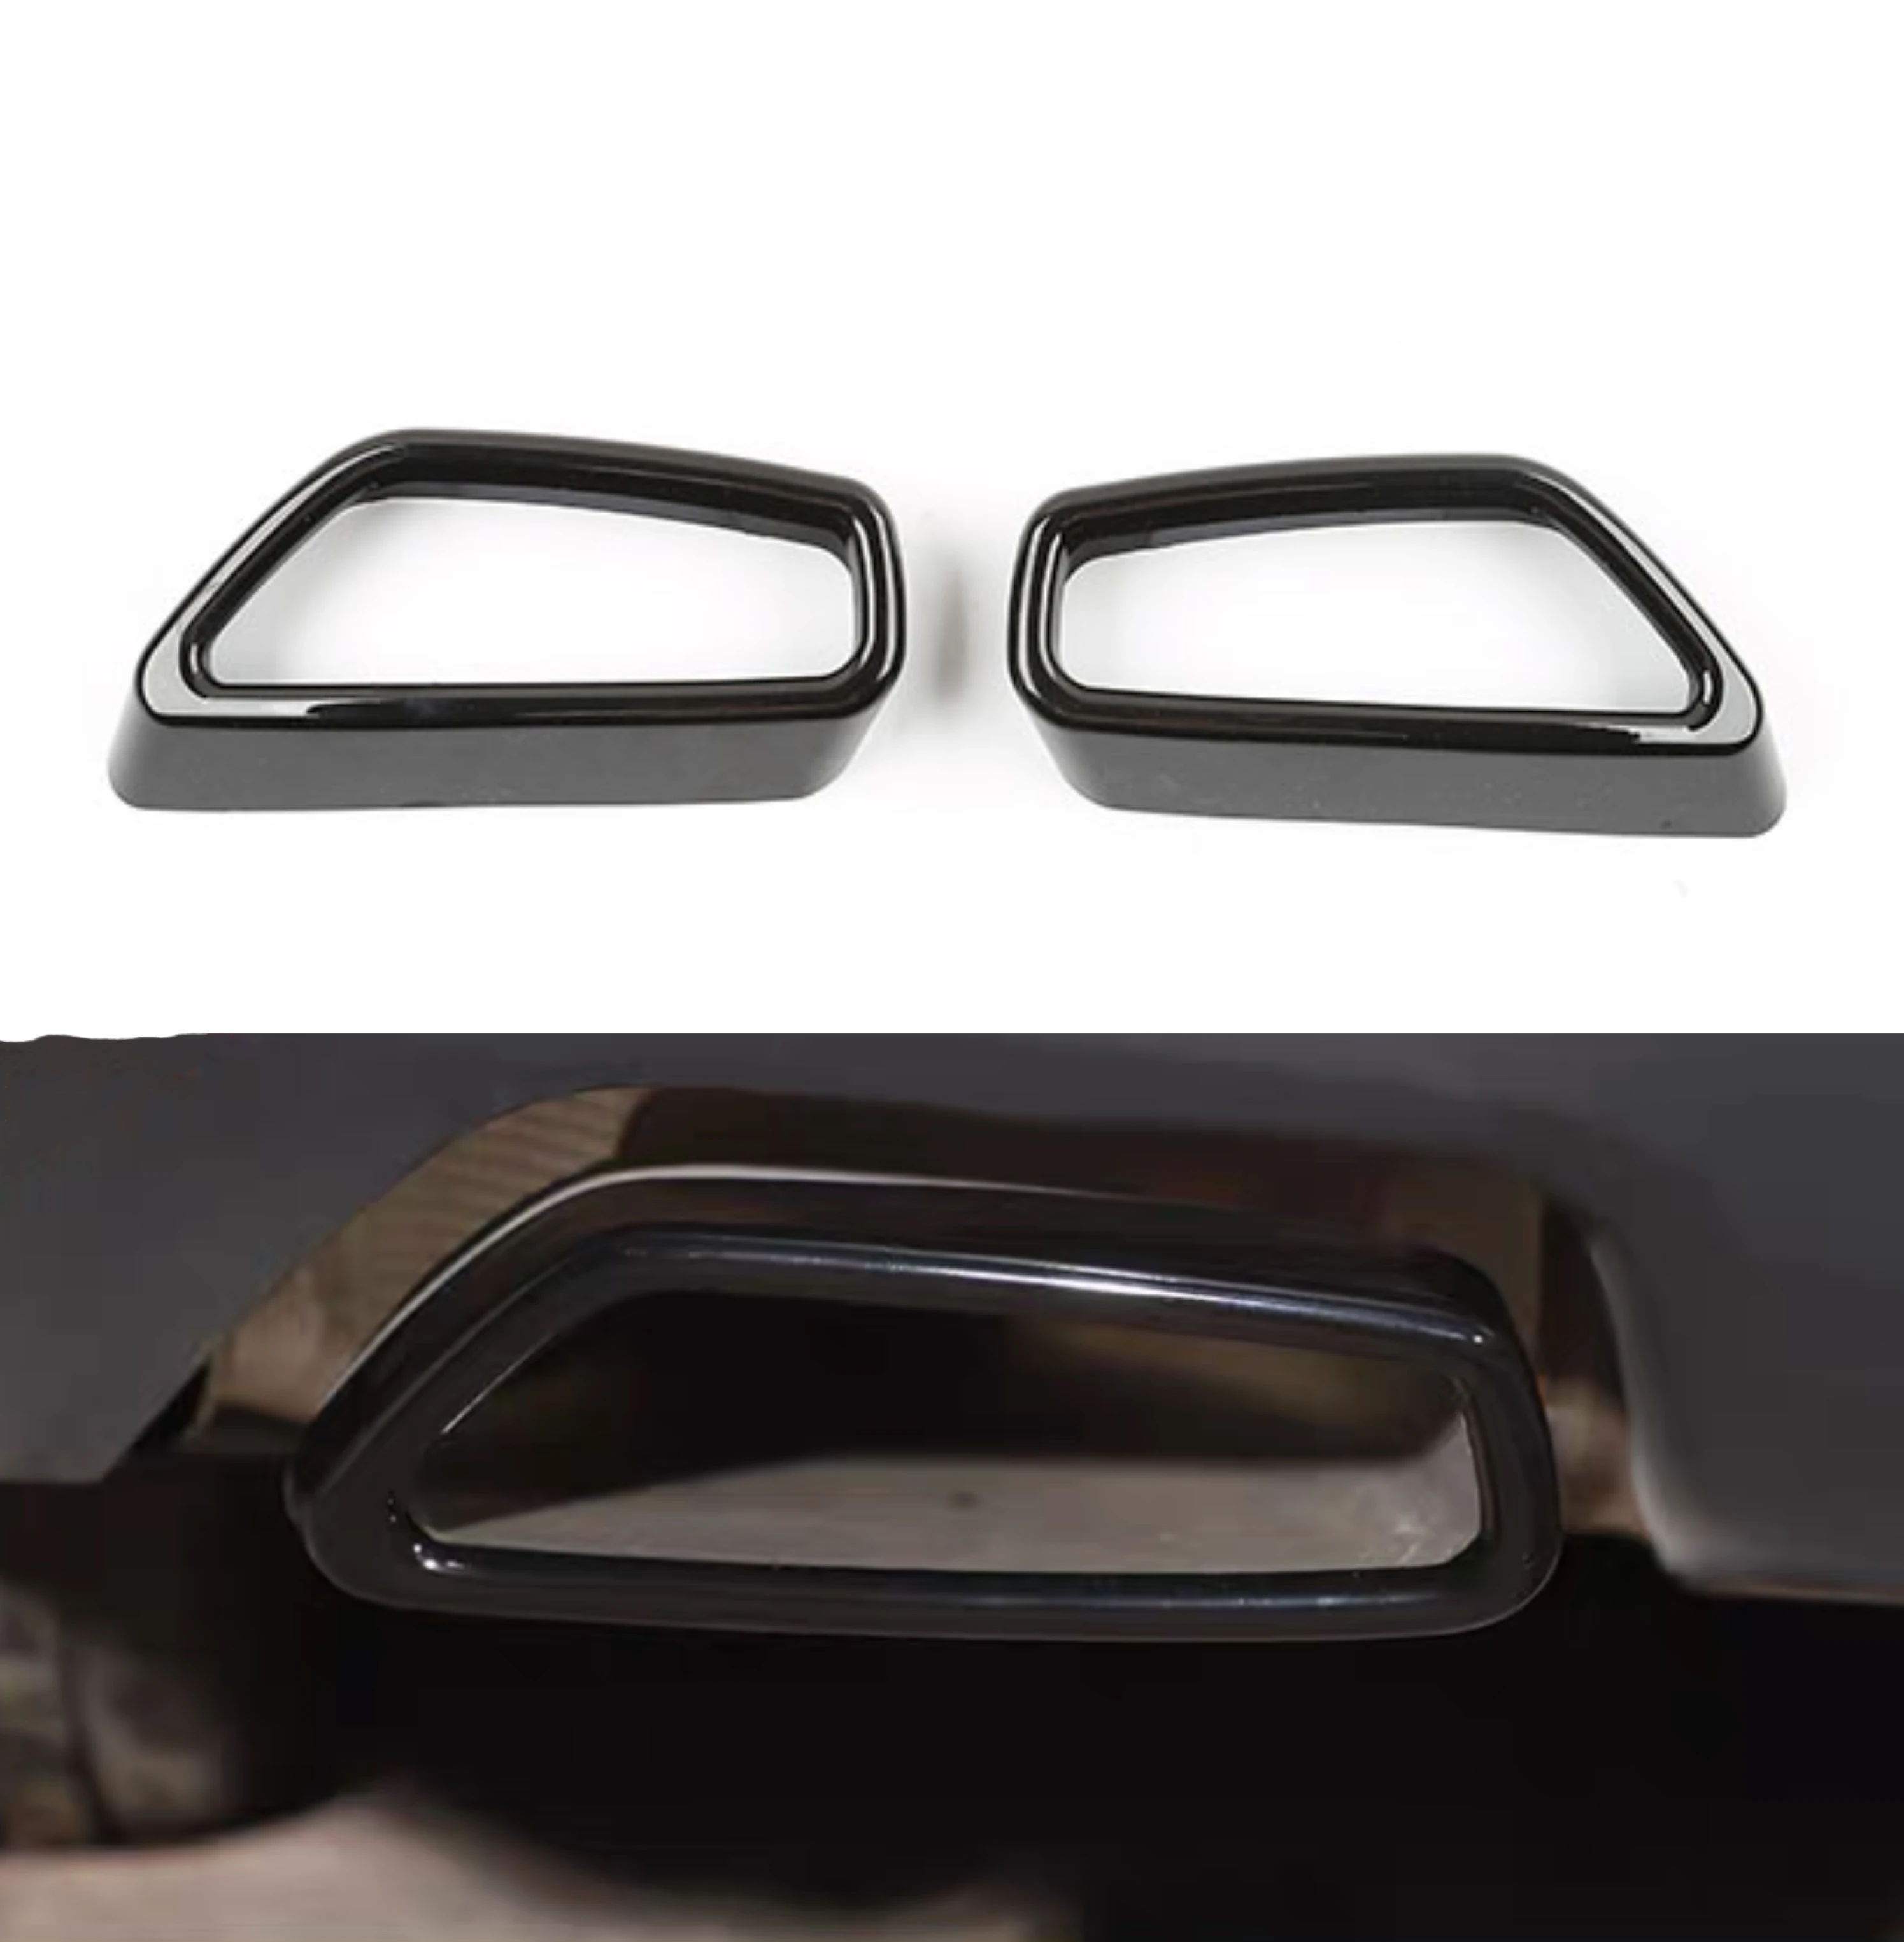 

Car Tail Muffler Exhaust Pipe Output Cover Trim For BMW 5 6 Series GT G30 G38 G32 2018 2019 2020 2021 Glossy Black ABS